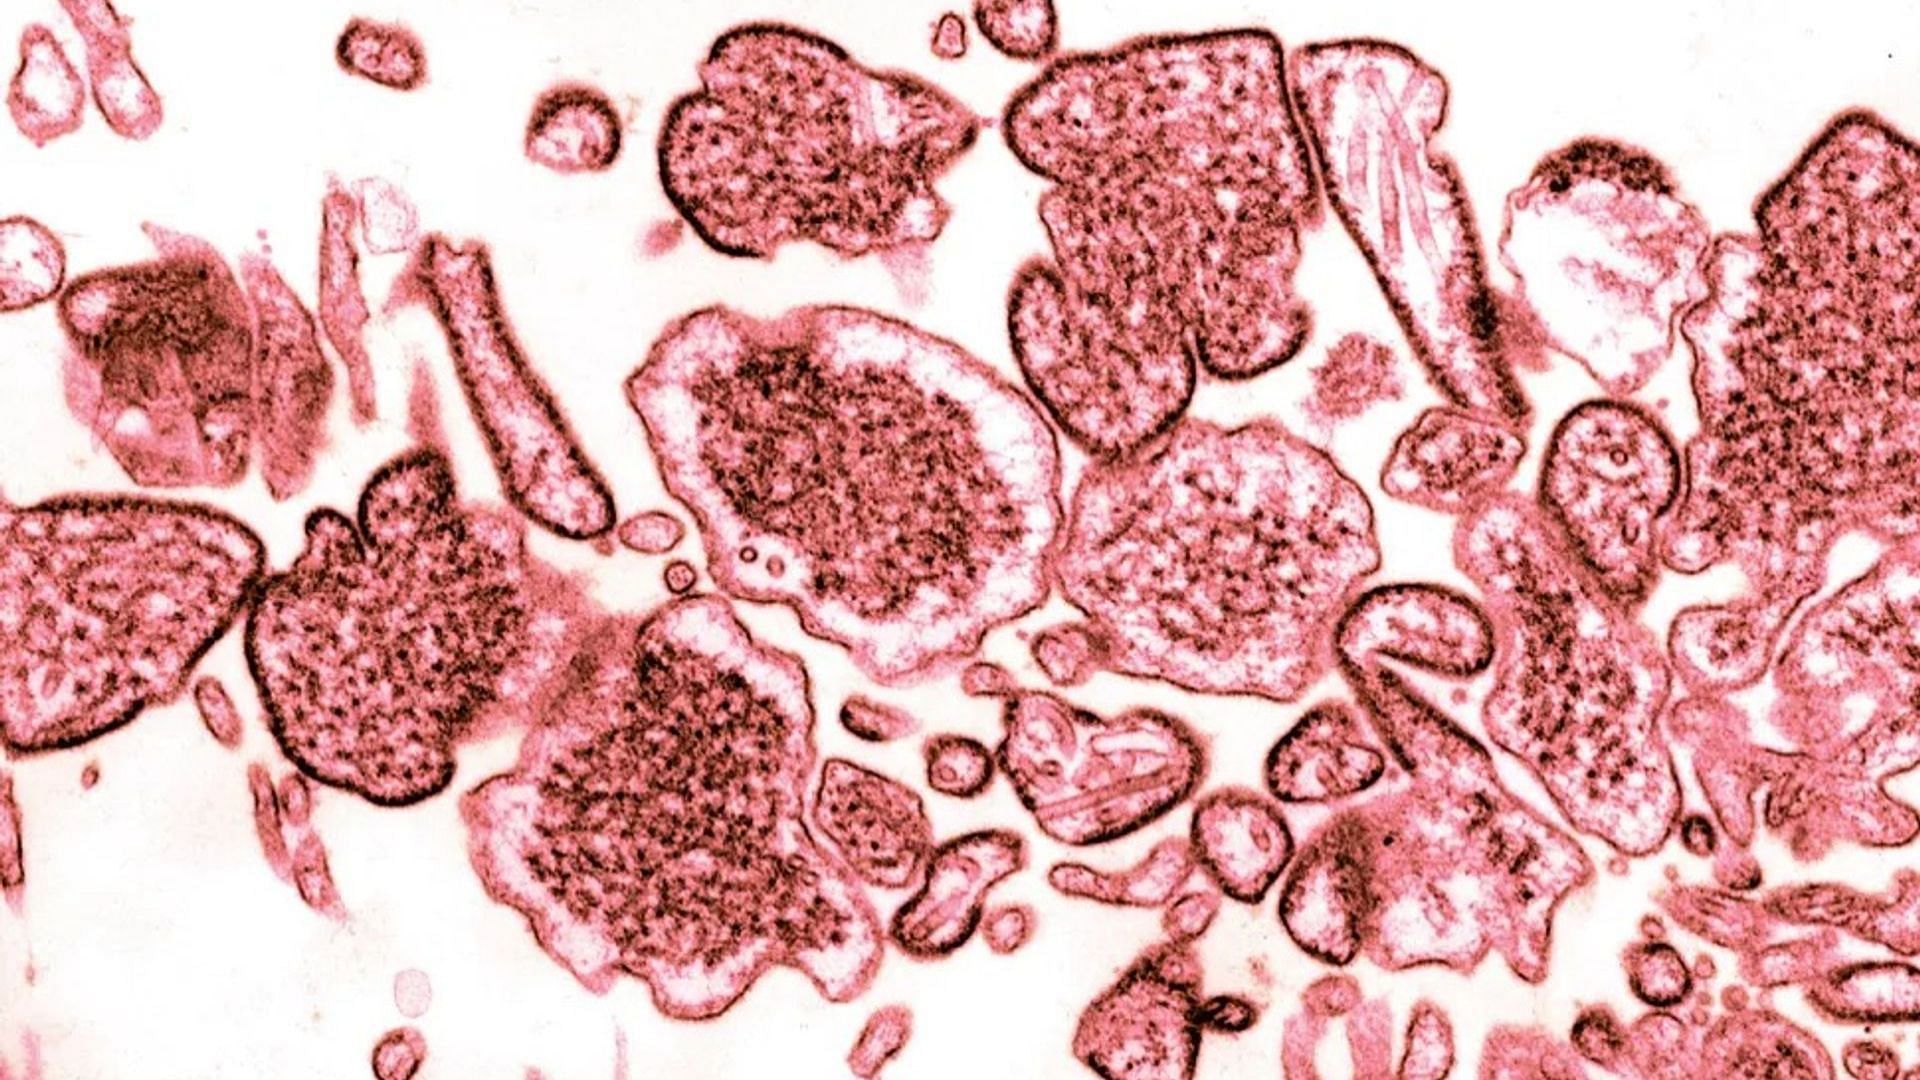 Sample of Nipah virus, which is from the same family as that of Langya virus (Image via BSIP/UIG/Getty Images)